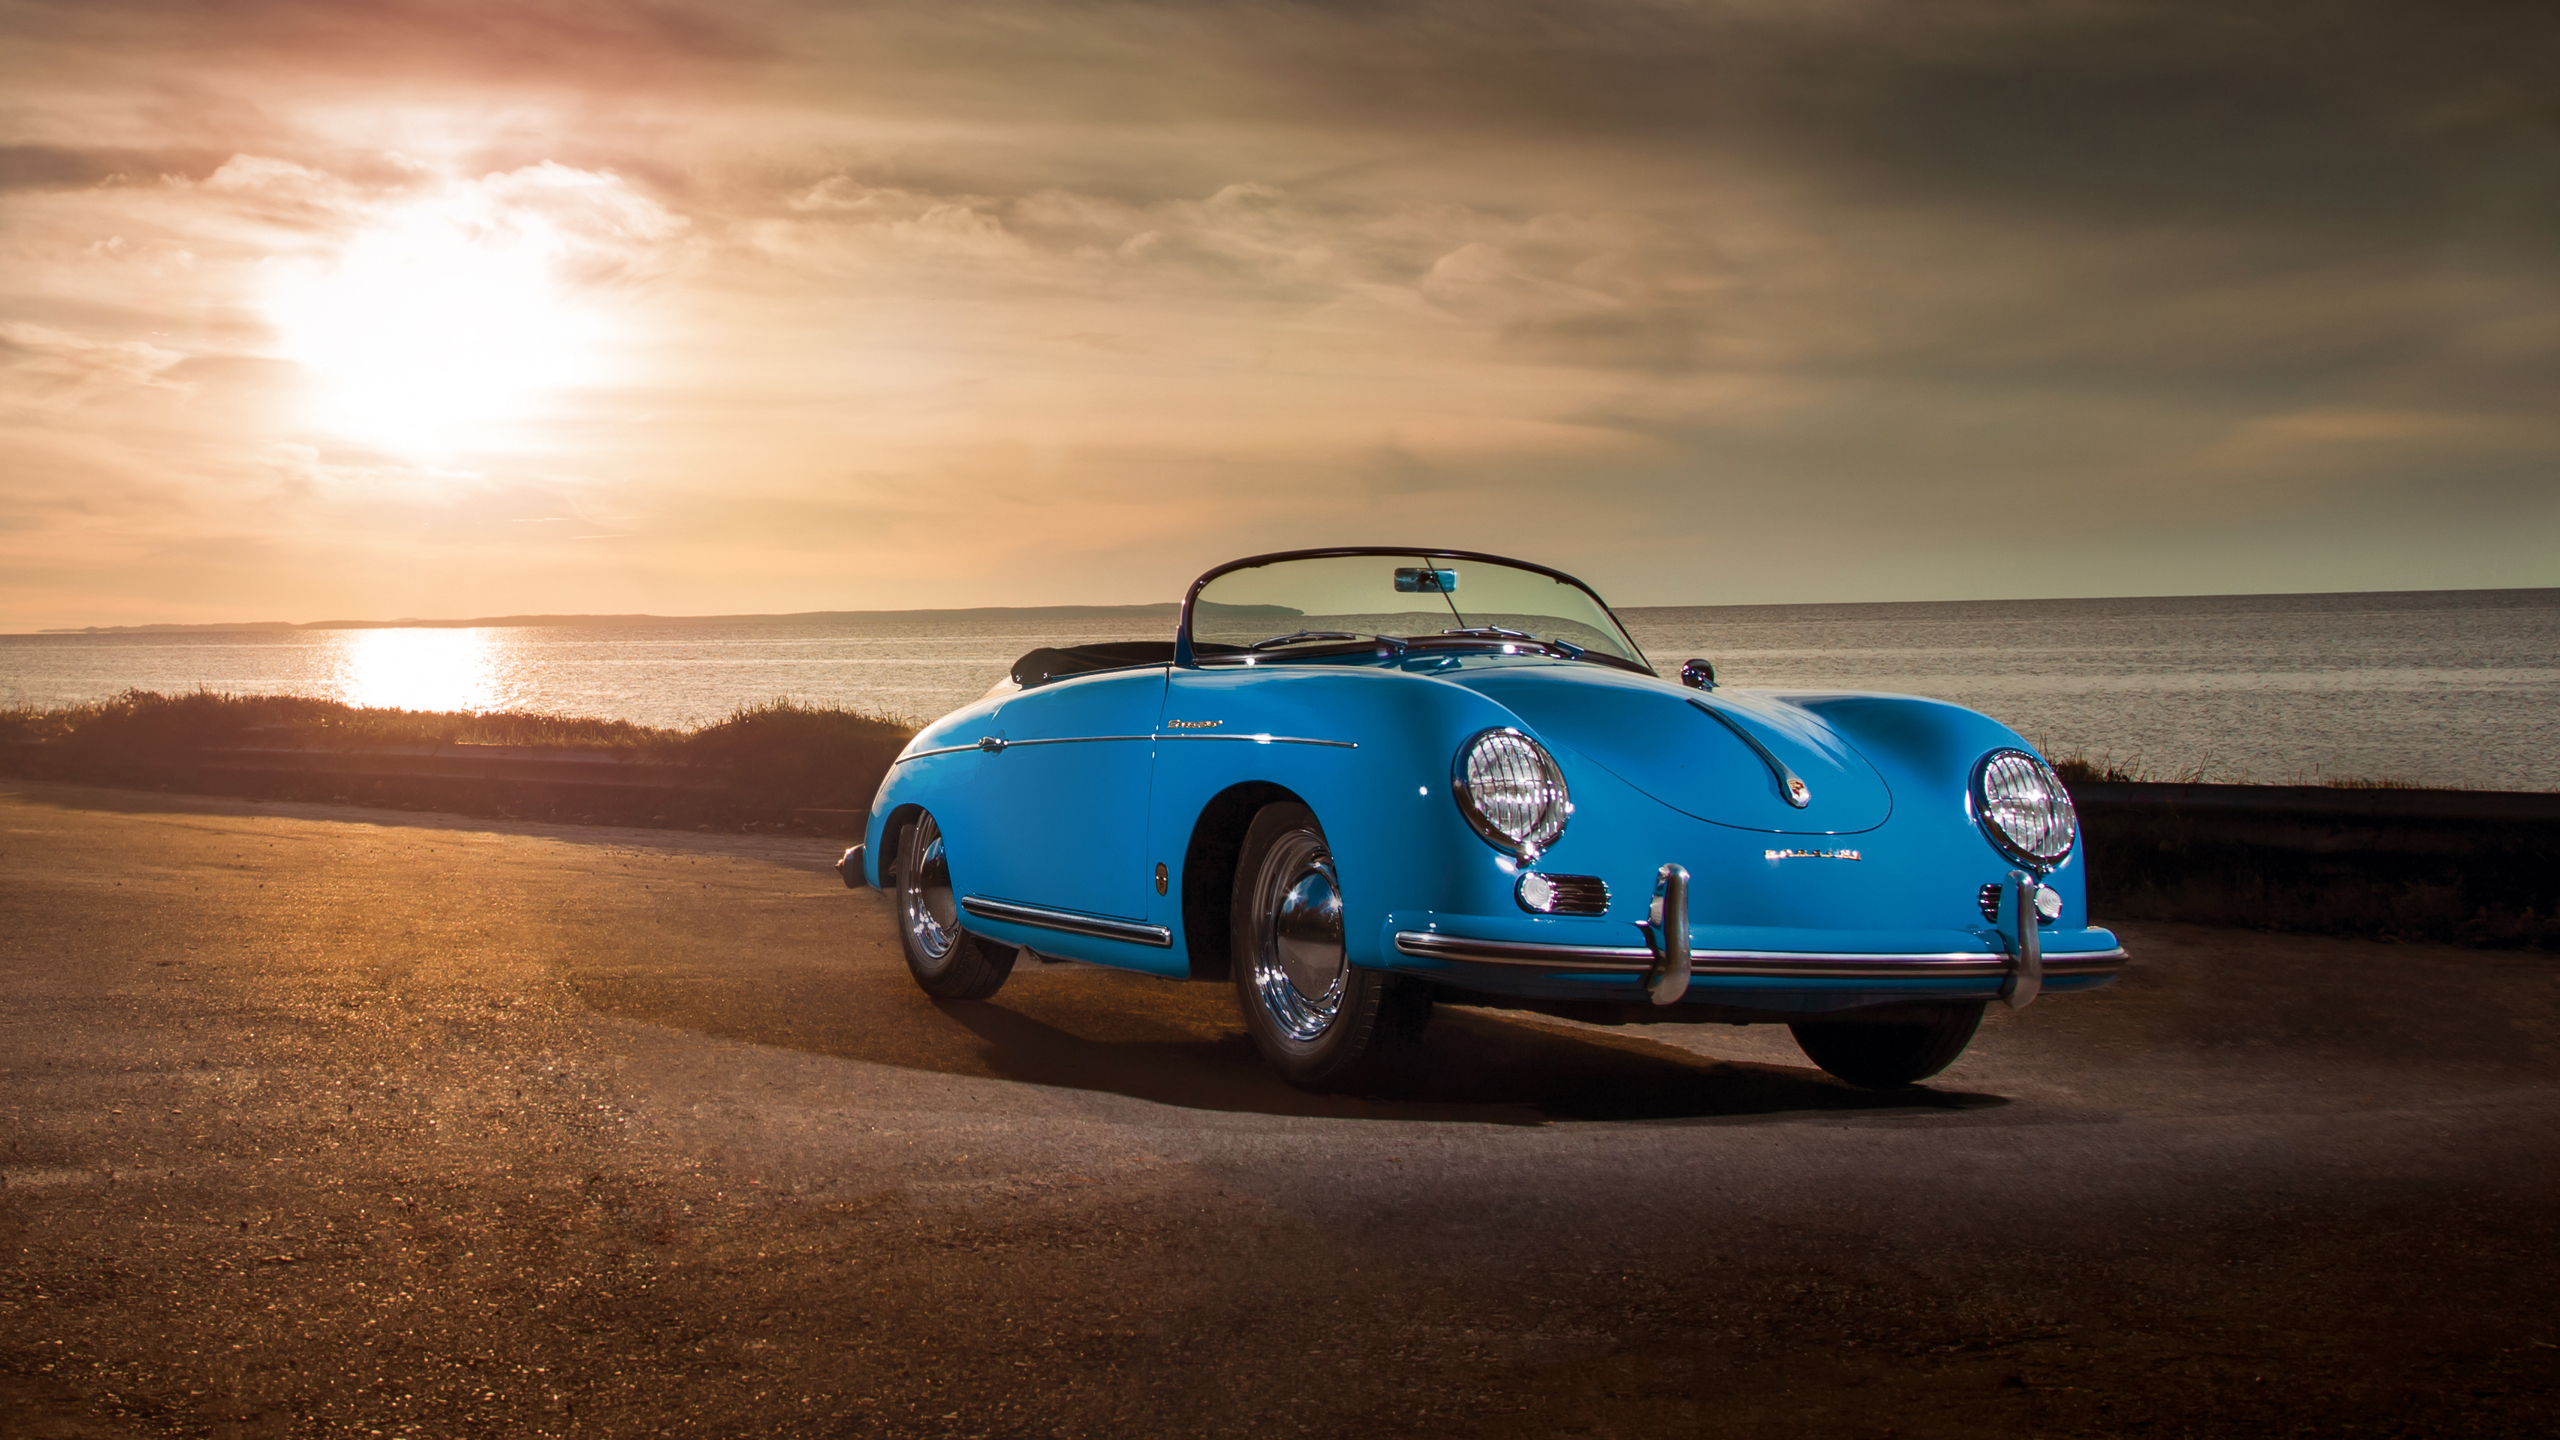 The Porsche 356 paved the way for a sports car giant - Hagerty Media